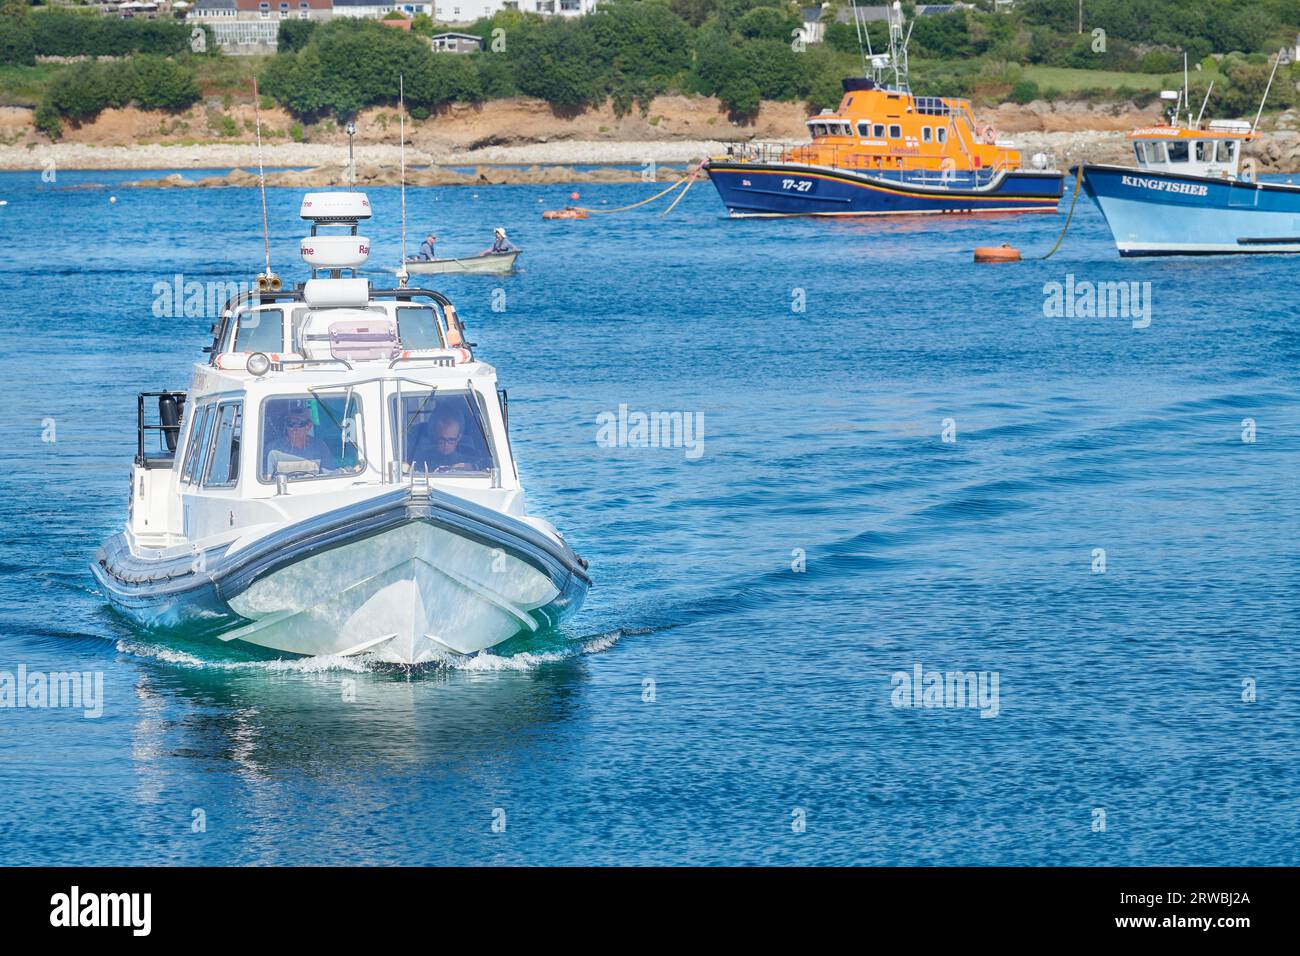 Motor boat in St Mary's harbour, Isles of Scilly. Stock Photo